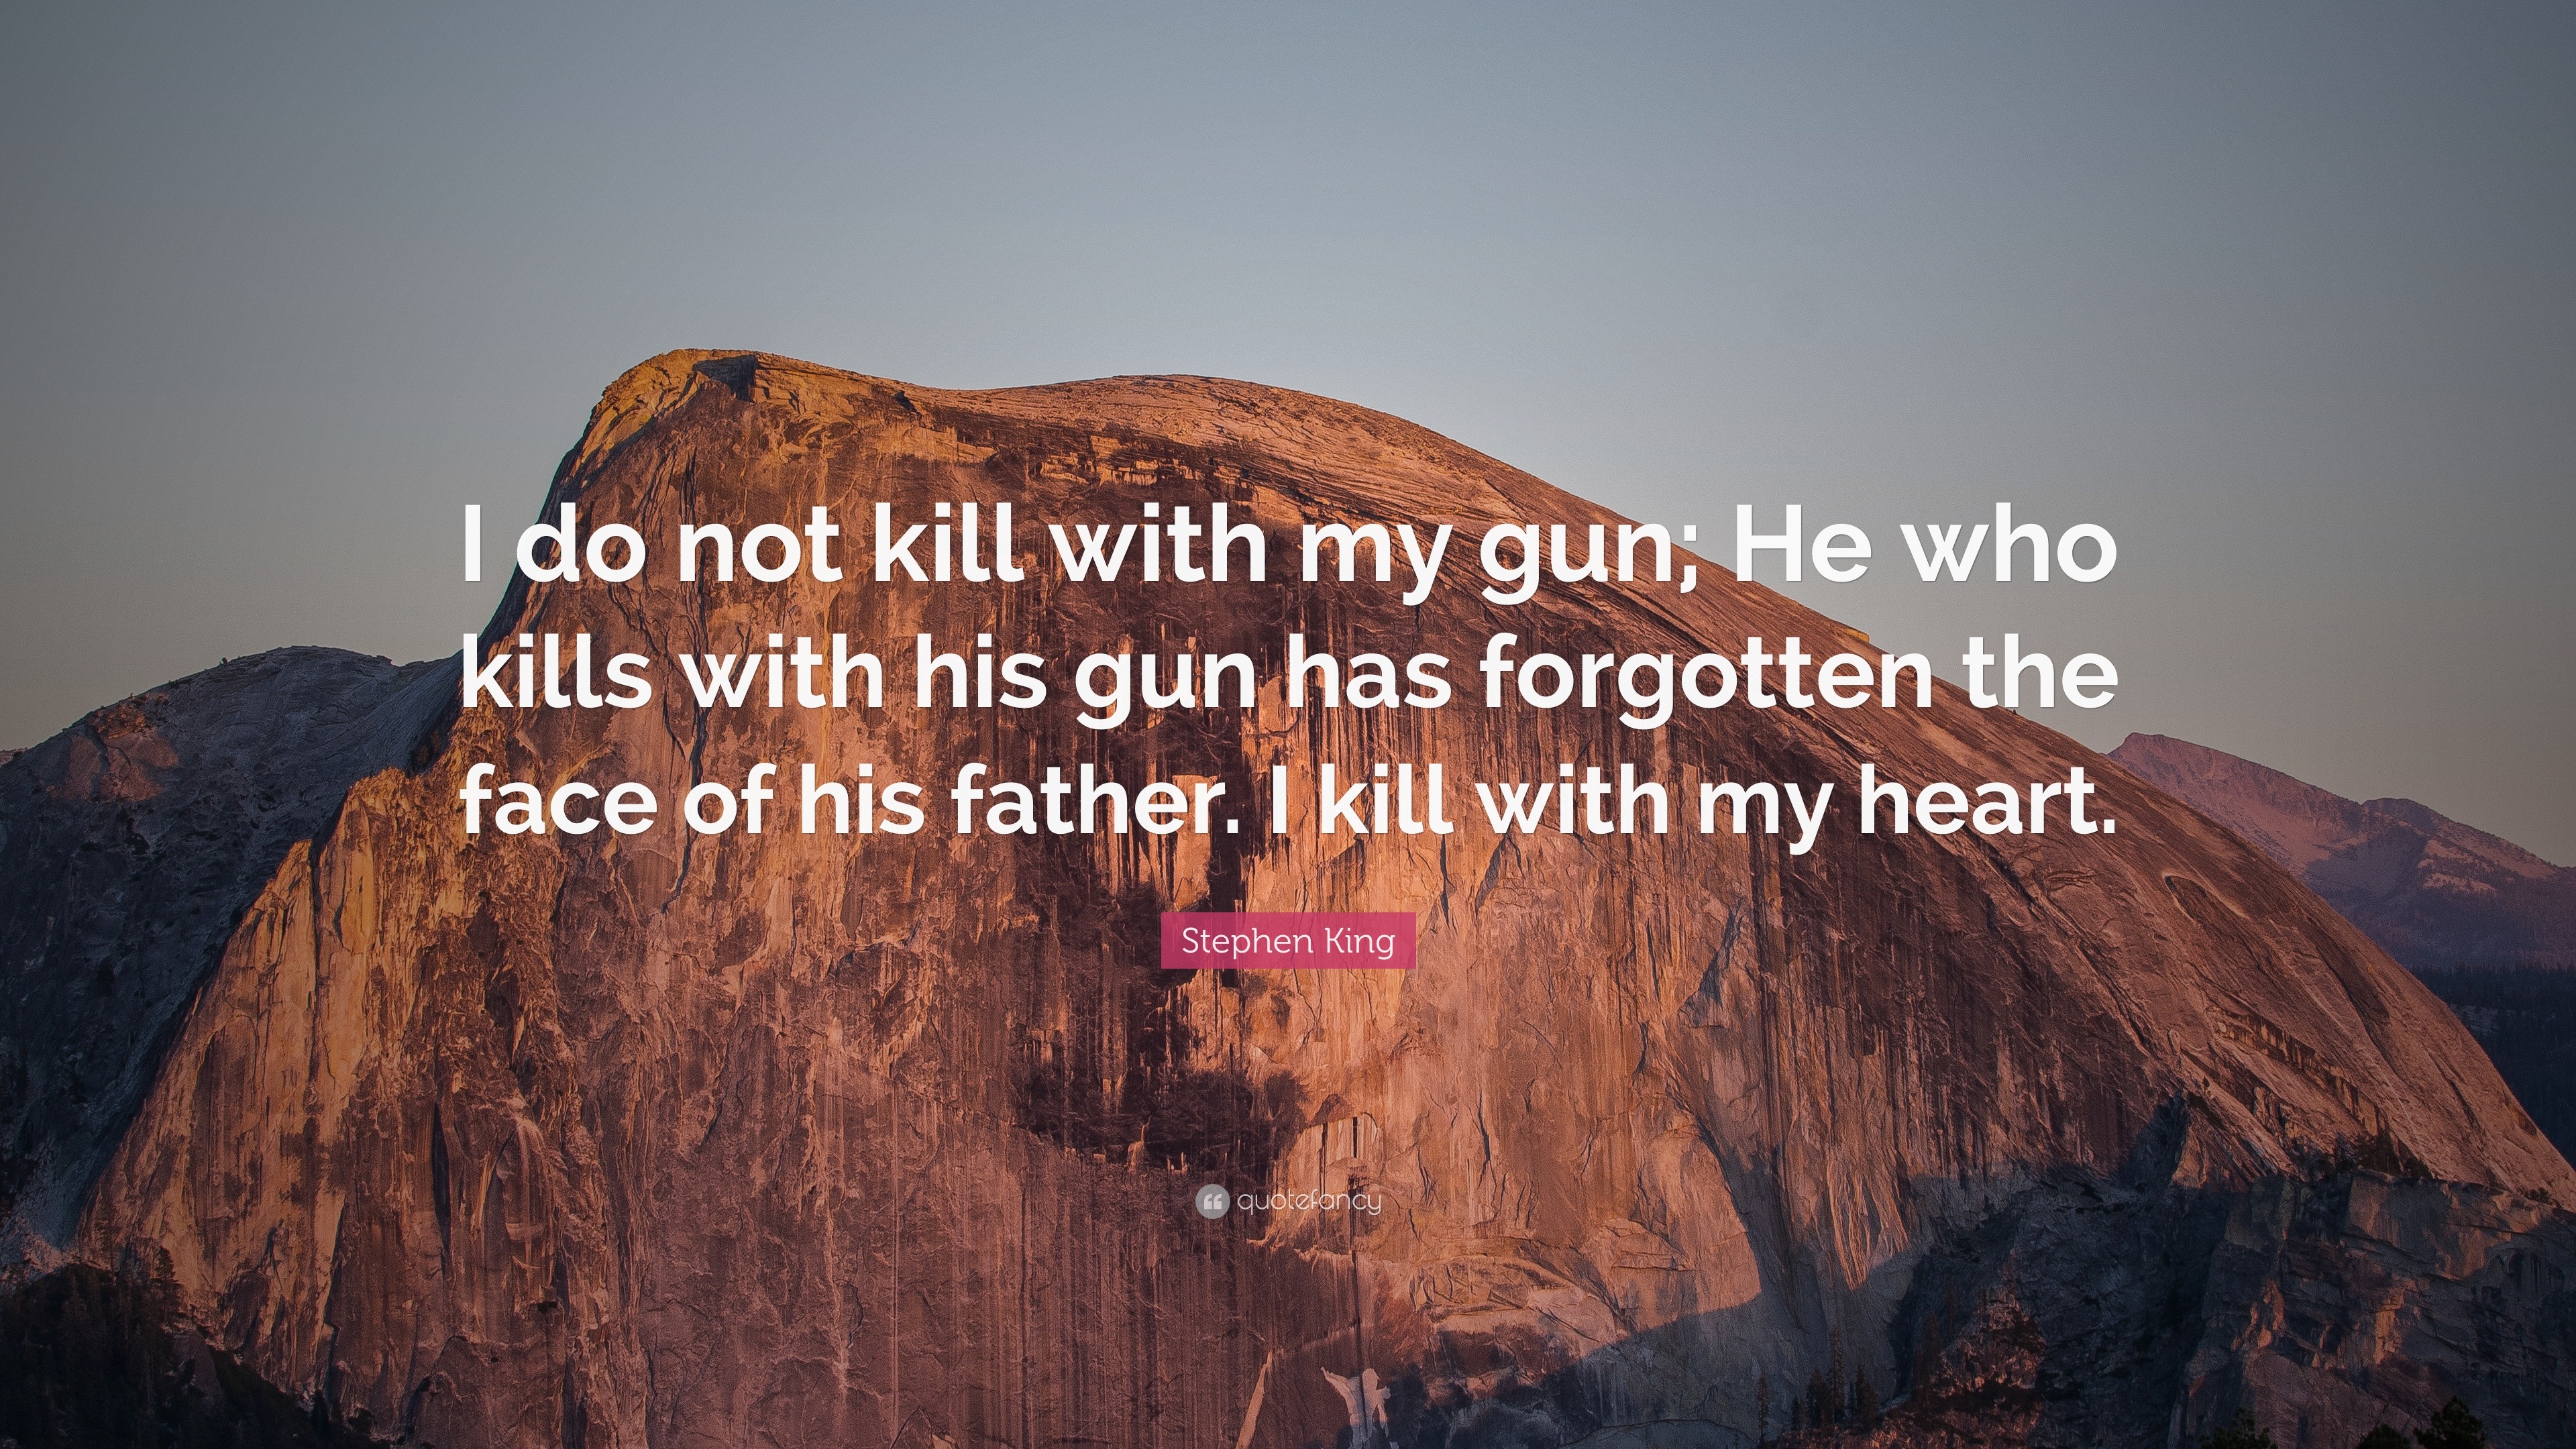 Stephen King Quote: "I do not kill with my gun; He who kills with his gun has forgotten the face ...